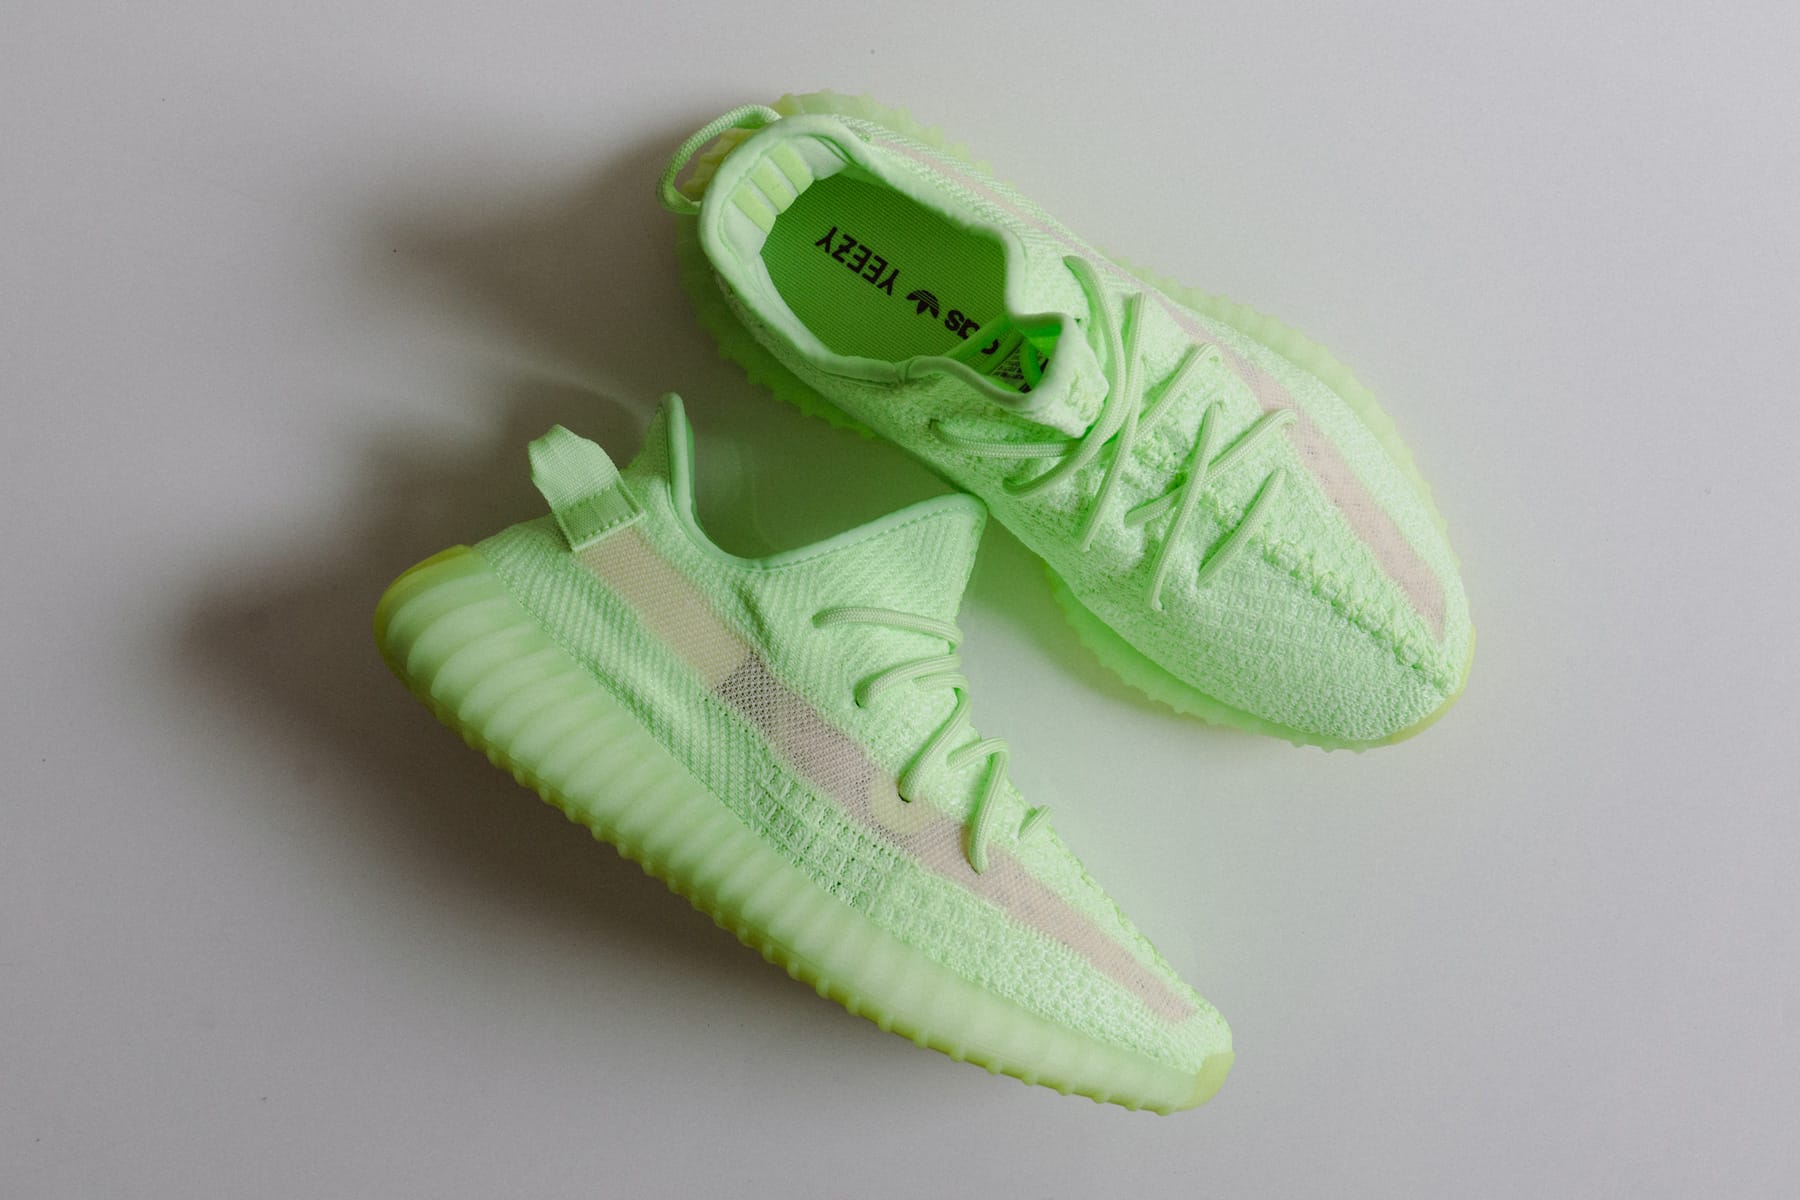 yeezy 350 glow outfit